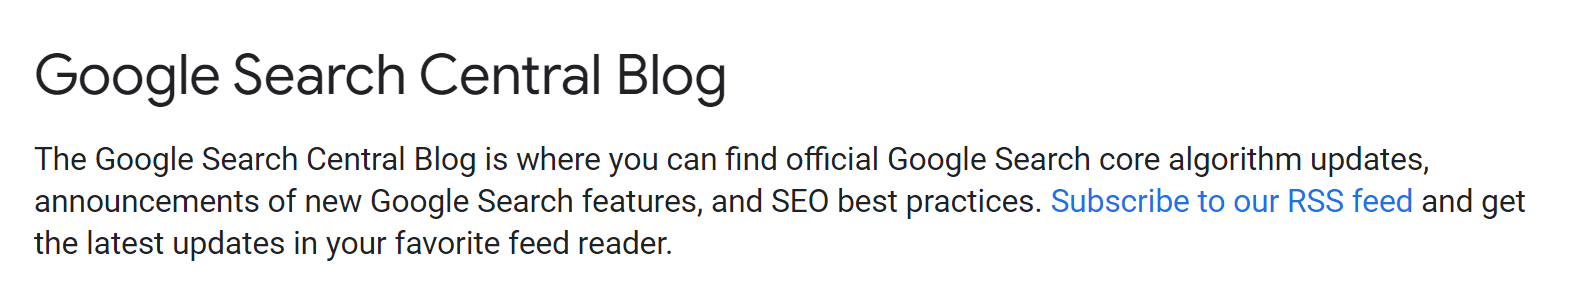 Google's Search Central Blog is the go-to SEO blog for getting SEO news straight from the source.